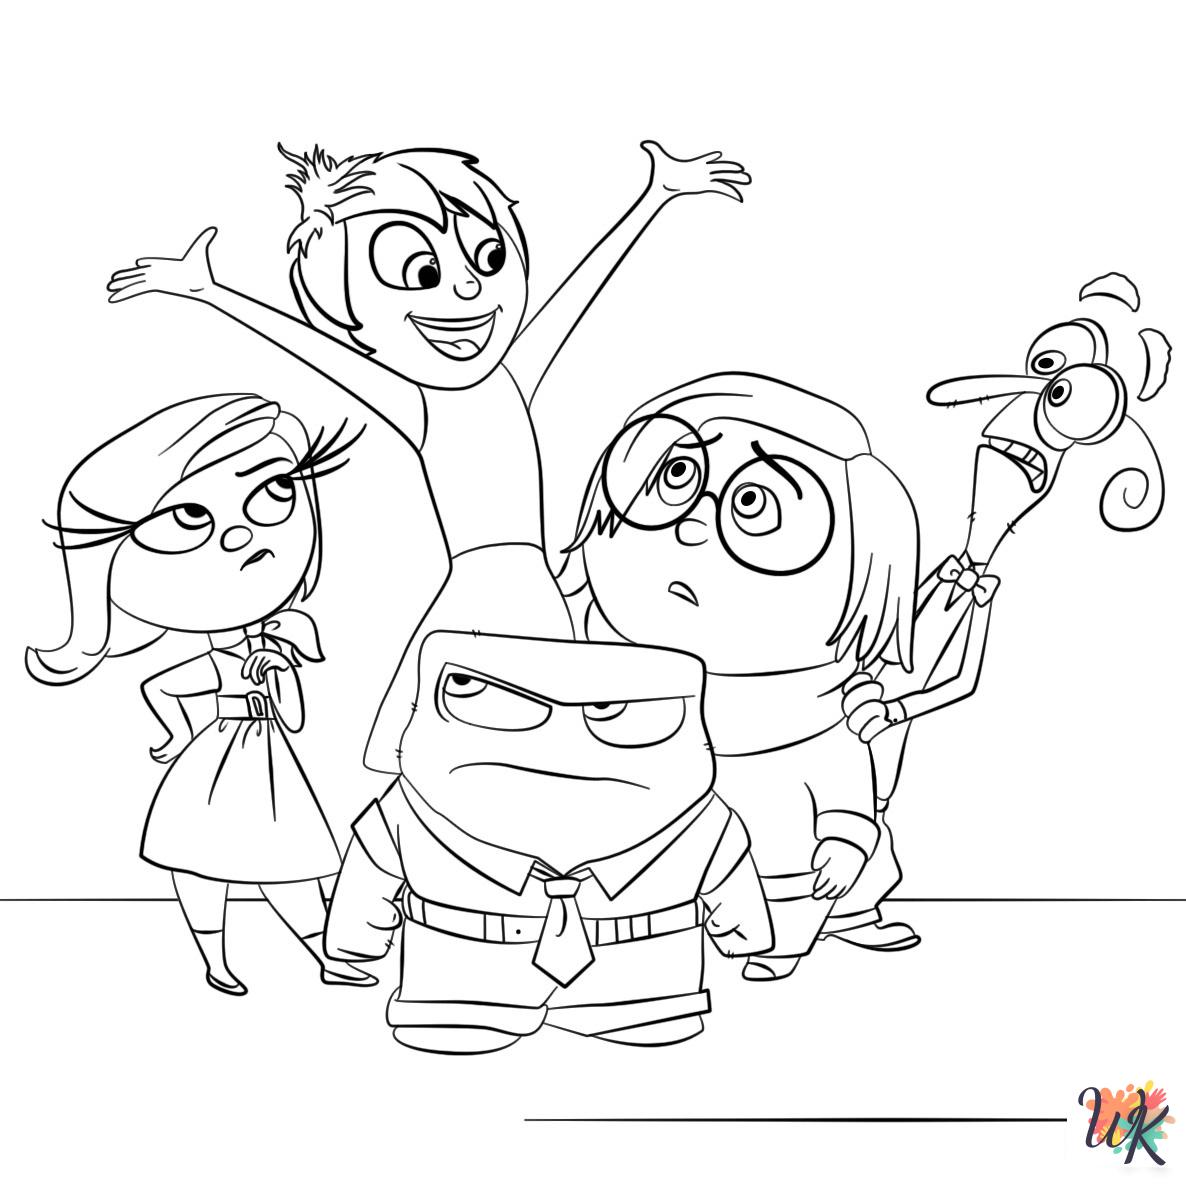 Inside Out coloring pages pdf